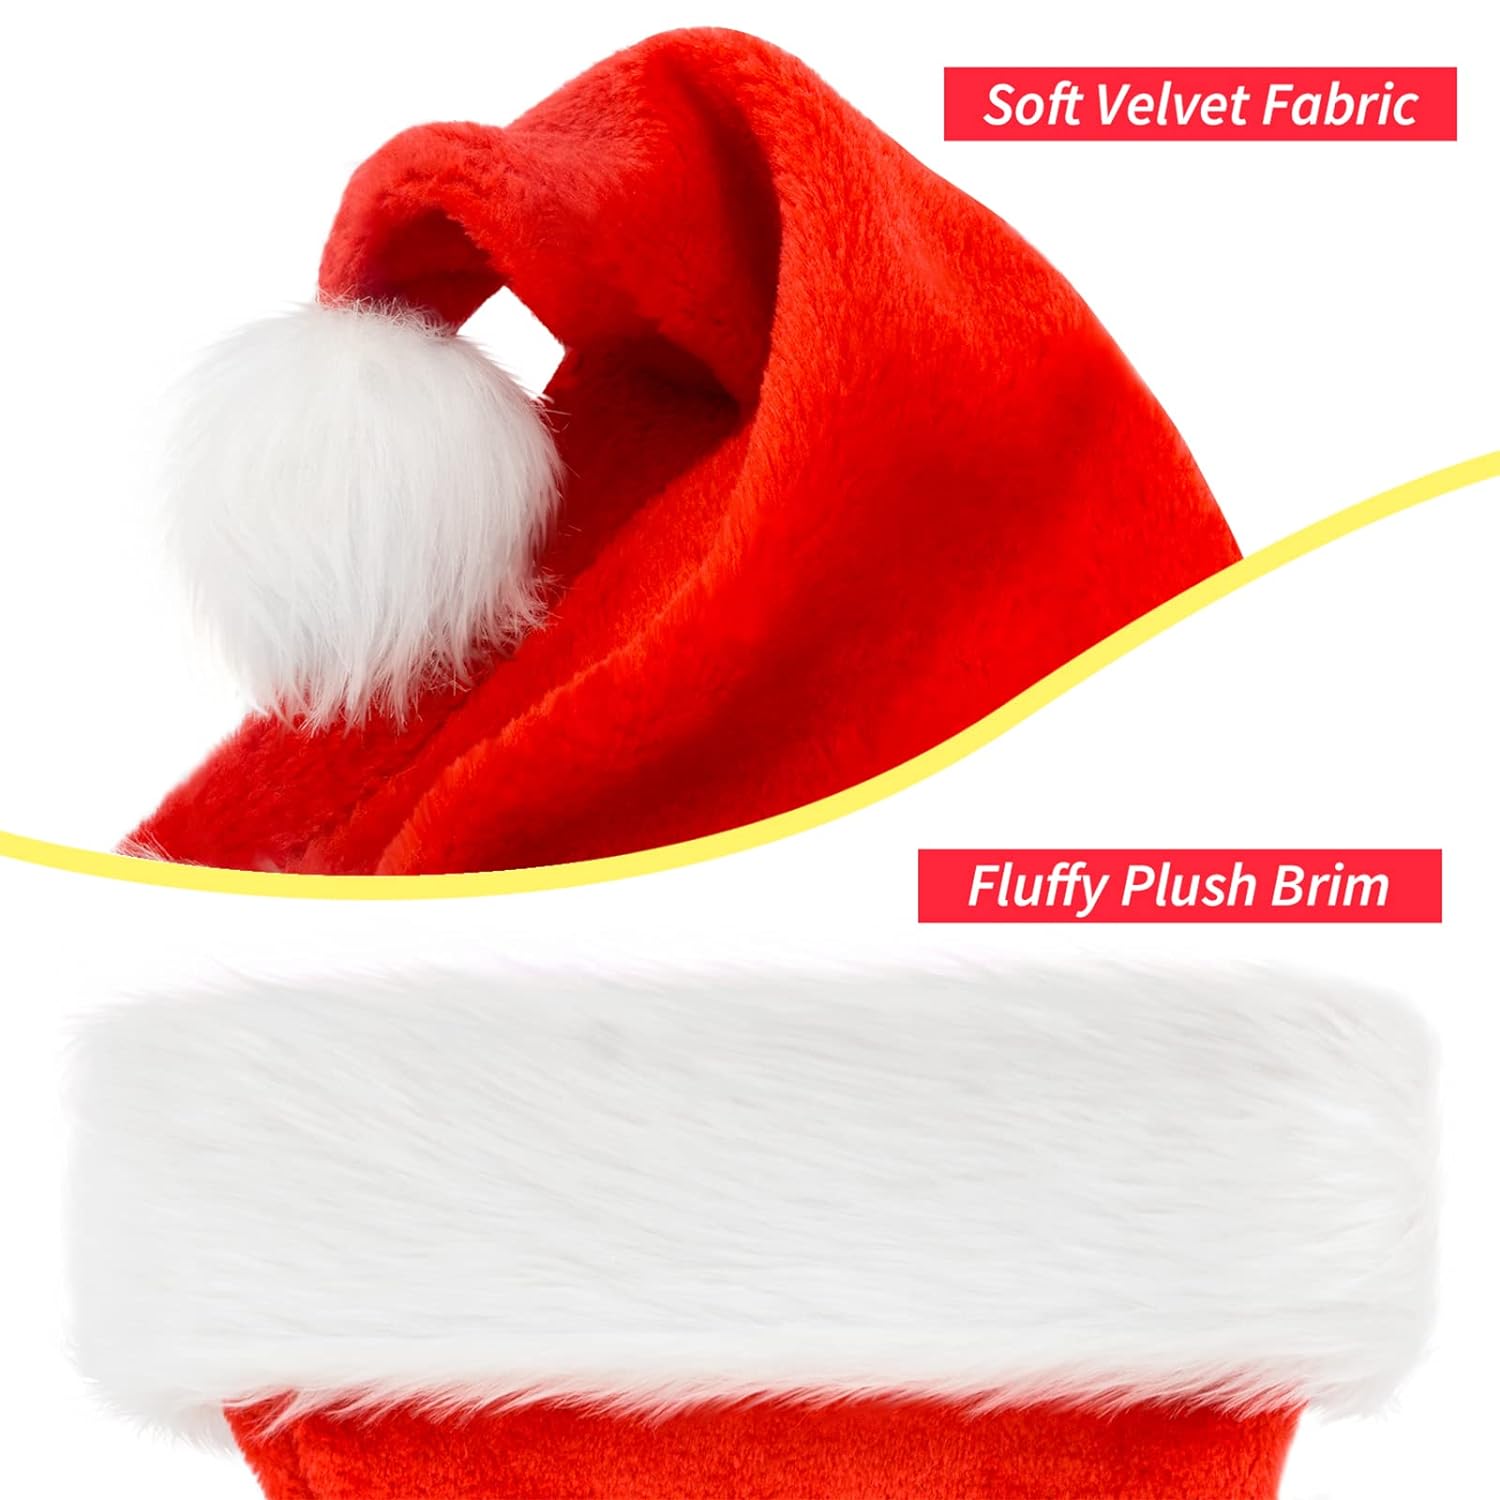 eCraftIndia Red and White Velvet Classic Fur Merry Christmas Hats, Santa Claus Caps for kids and Adults - XMAS Caps, Santa Hats for Christmas, New Year, Festive Holiday Party Celebration (Set of 24) 6